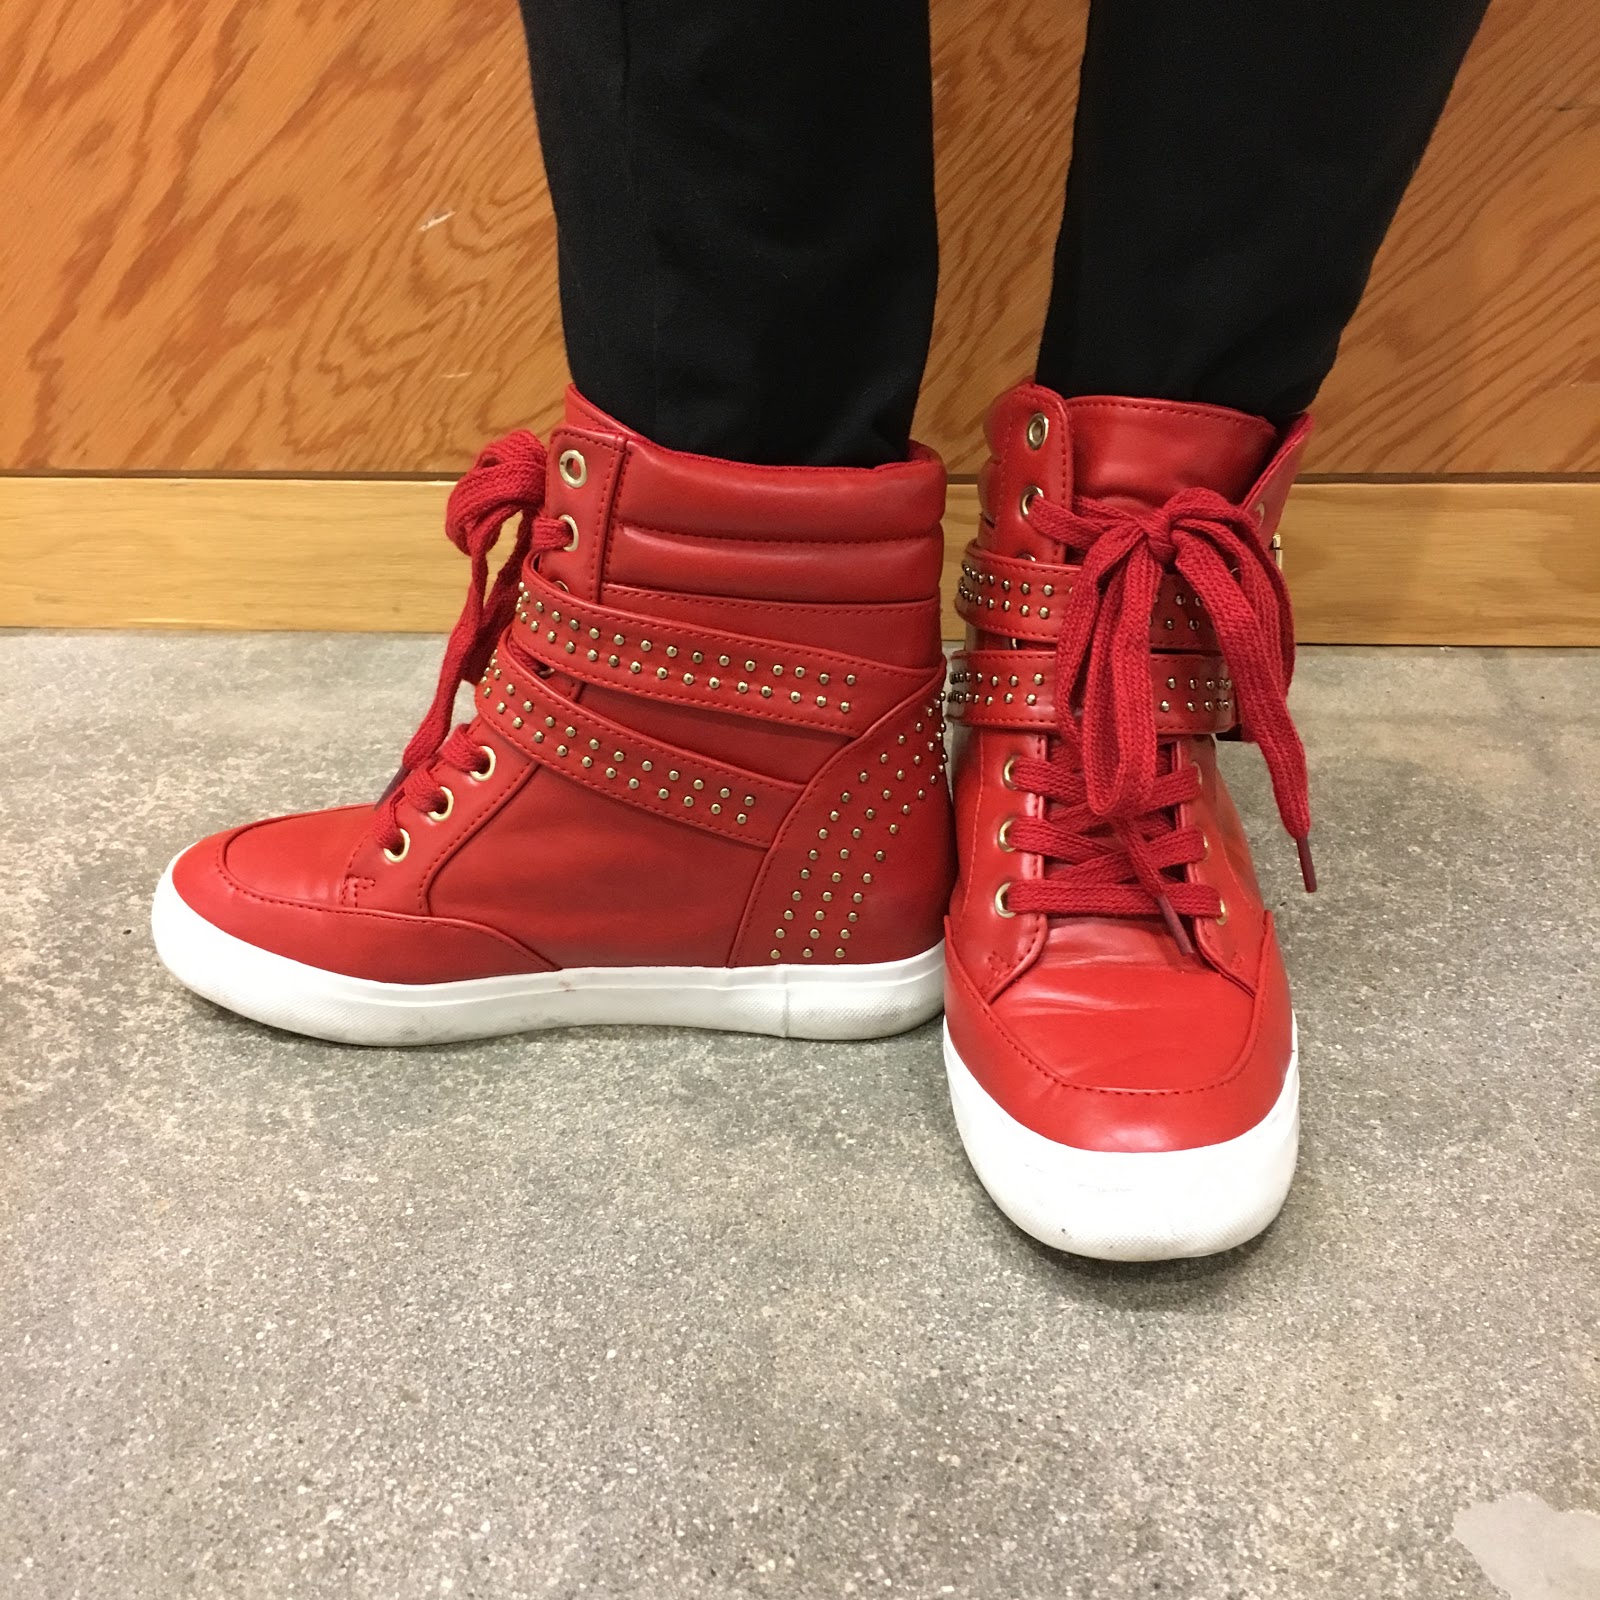 The of #TuesdayShoesday: JustFab Red Studded Sneakers